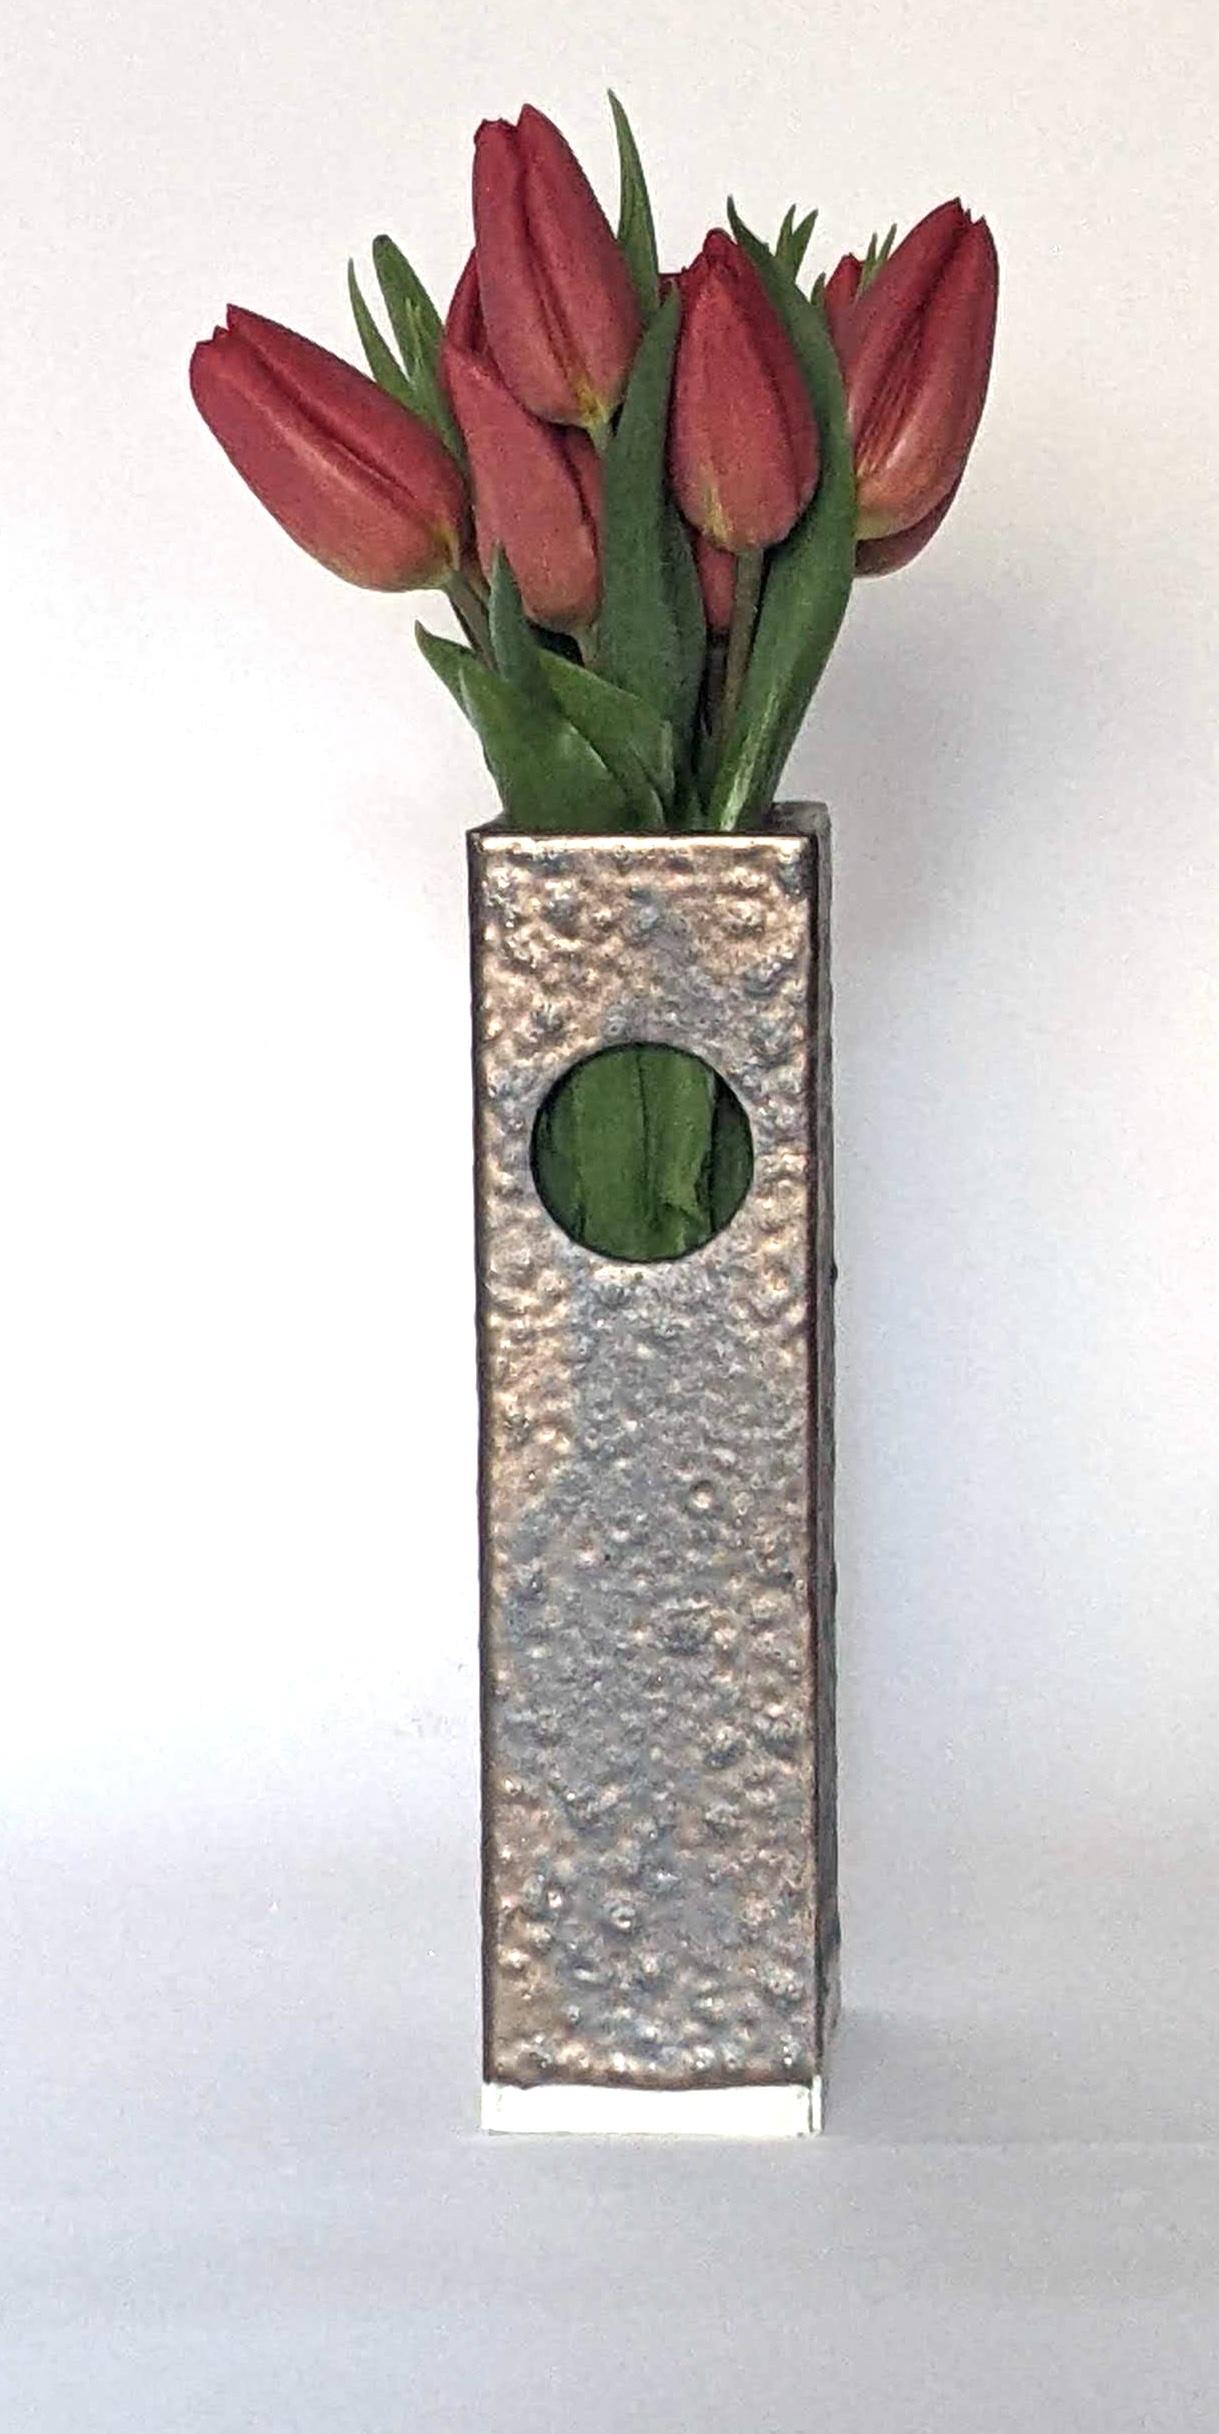 This meticulously crafted glazed ceramic vase design features a sleek modern rectangle hollow brick form with circular and triangular openings. This unique piece stands out for its exquisite hand-crafted construction, thoughtful design, and